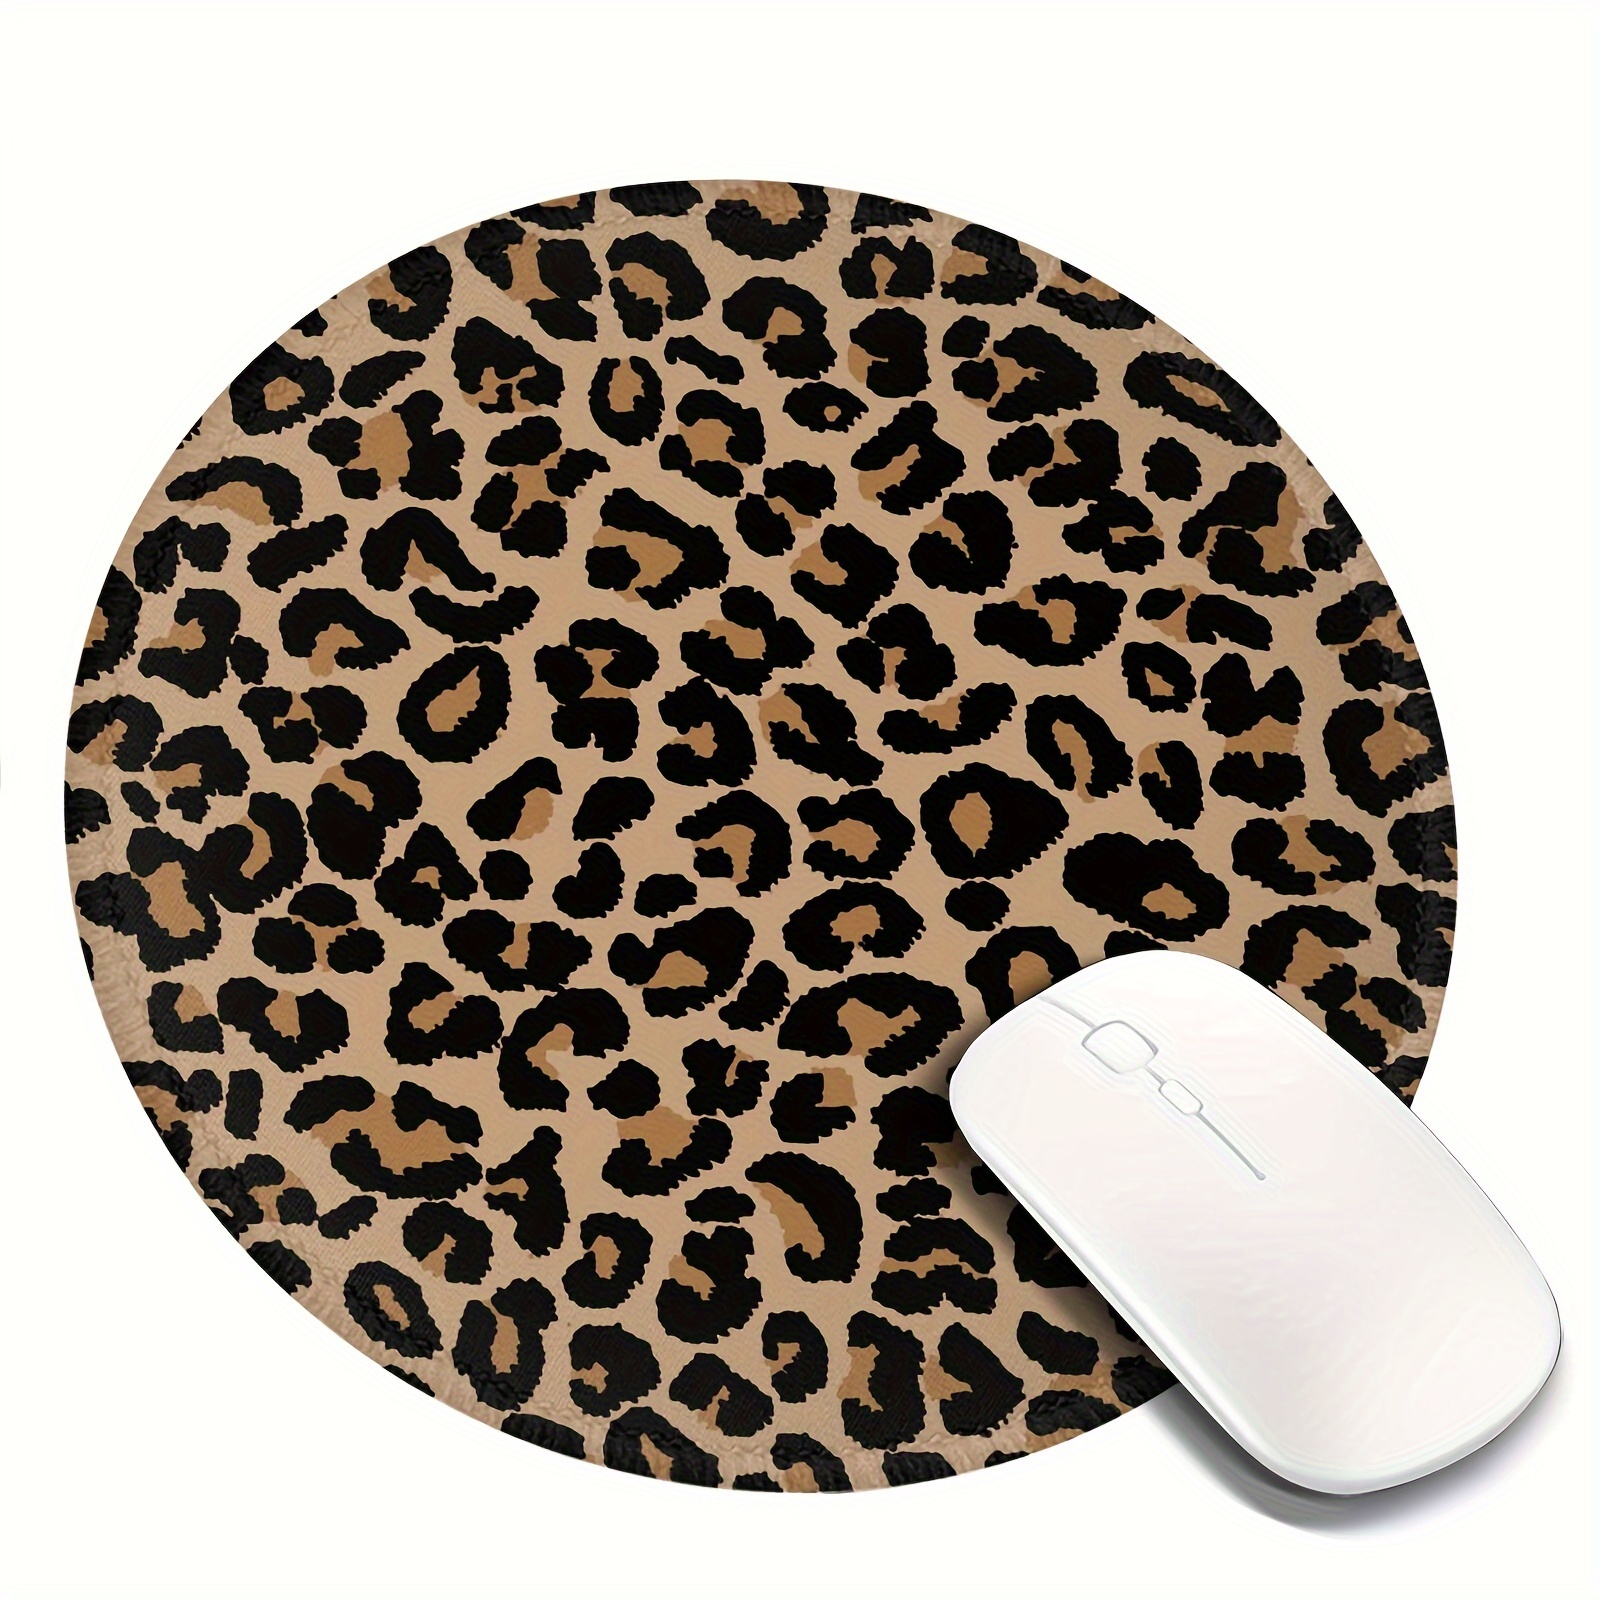 

1pc Leopard Print Round Mouse Pad Cheetah Print Mousepad With Stitched Edge Premium-textured Non-slip Rubber Base Animal Mouse Mat For Office & Home Wireless Mouse